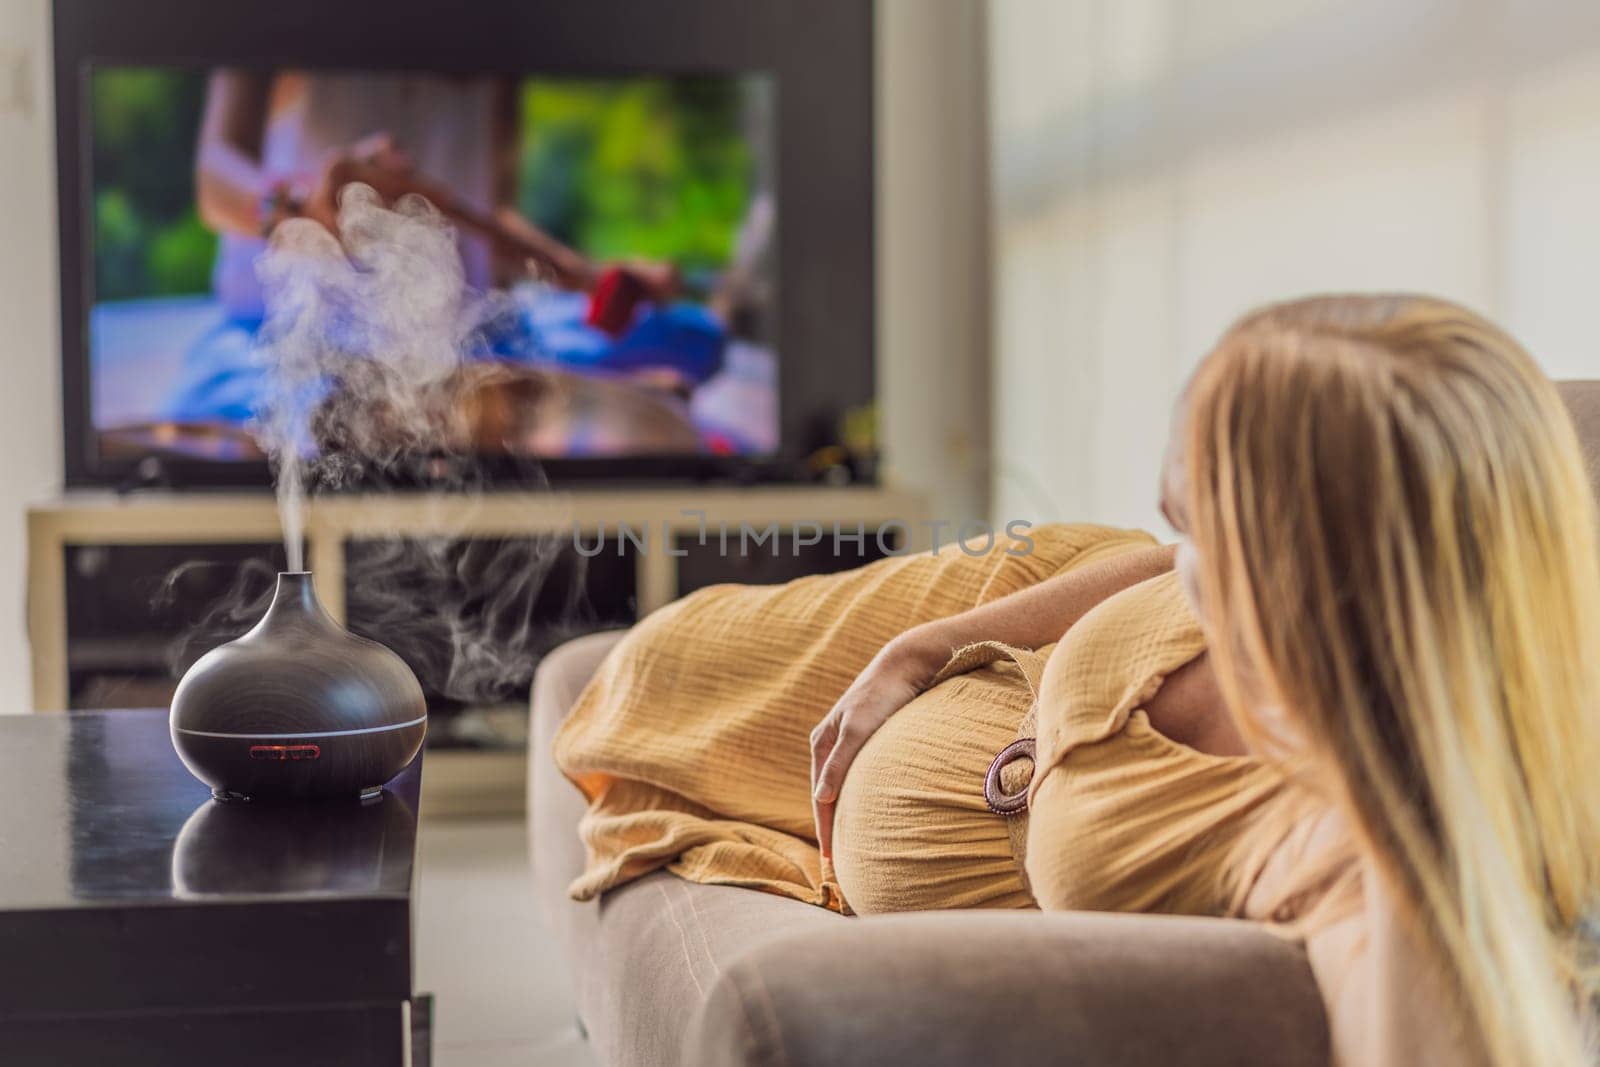 A blissful pregnant woman immerses in relaxation, savoring the soothing aroma from a diffuser while indulging in a calming TV video, embracing tranquility during her pregnant journey by galitskaya